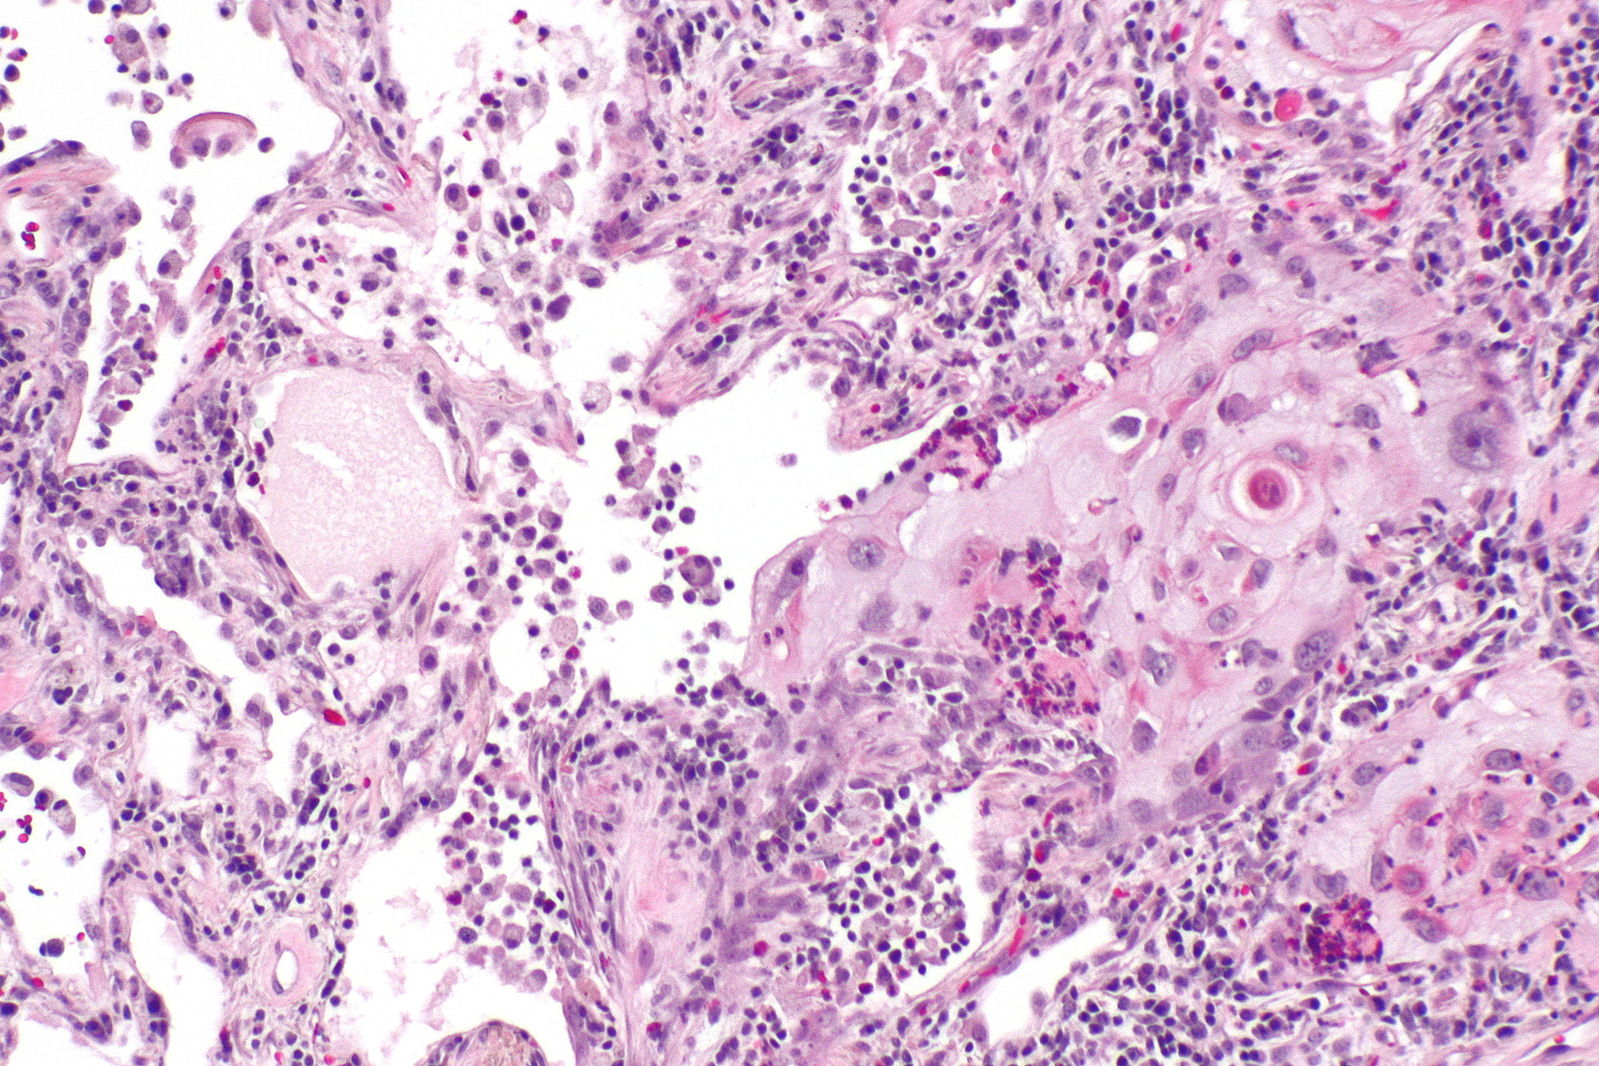 Micropathology: Squamous cell carcinoma of the lung. H&E stain.